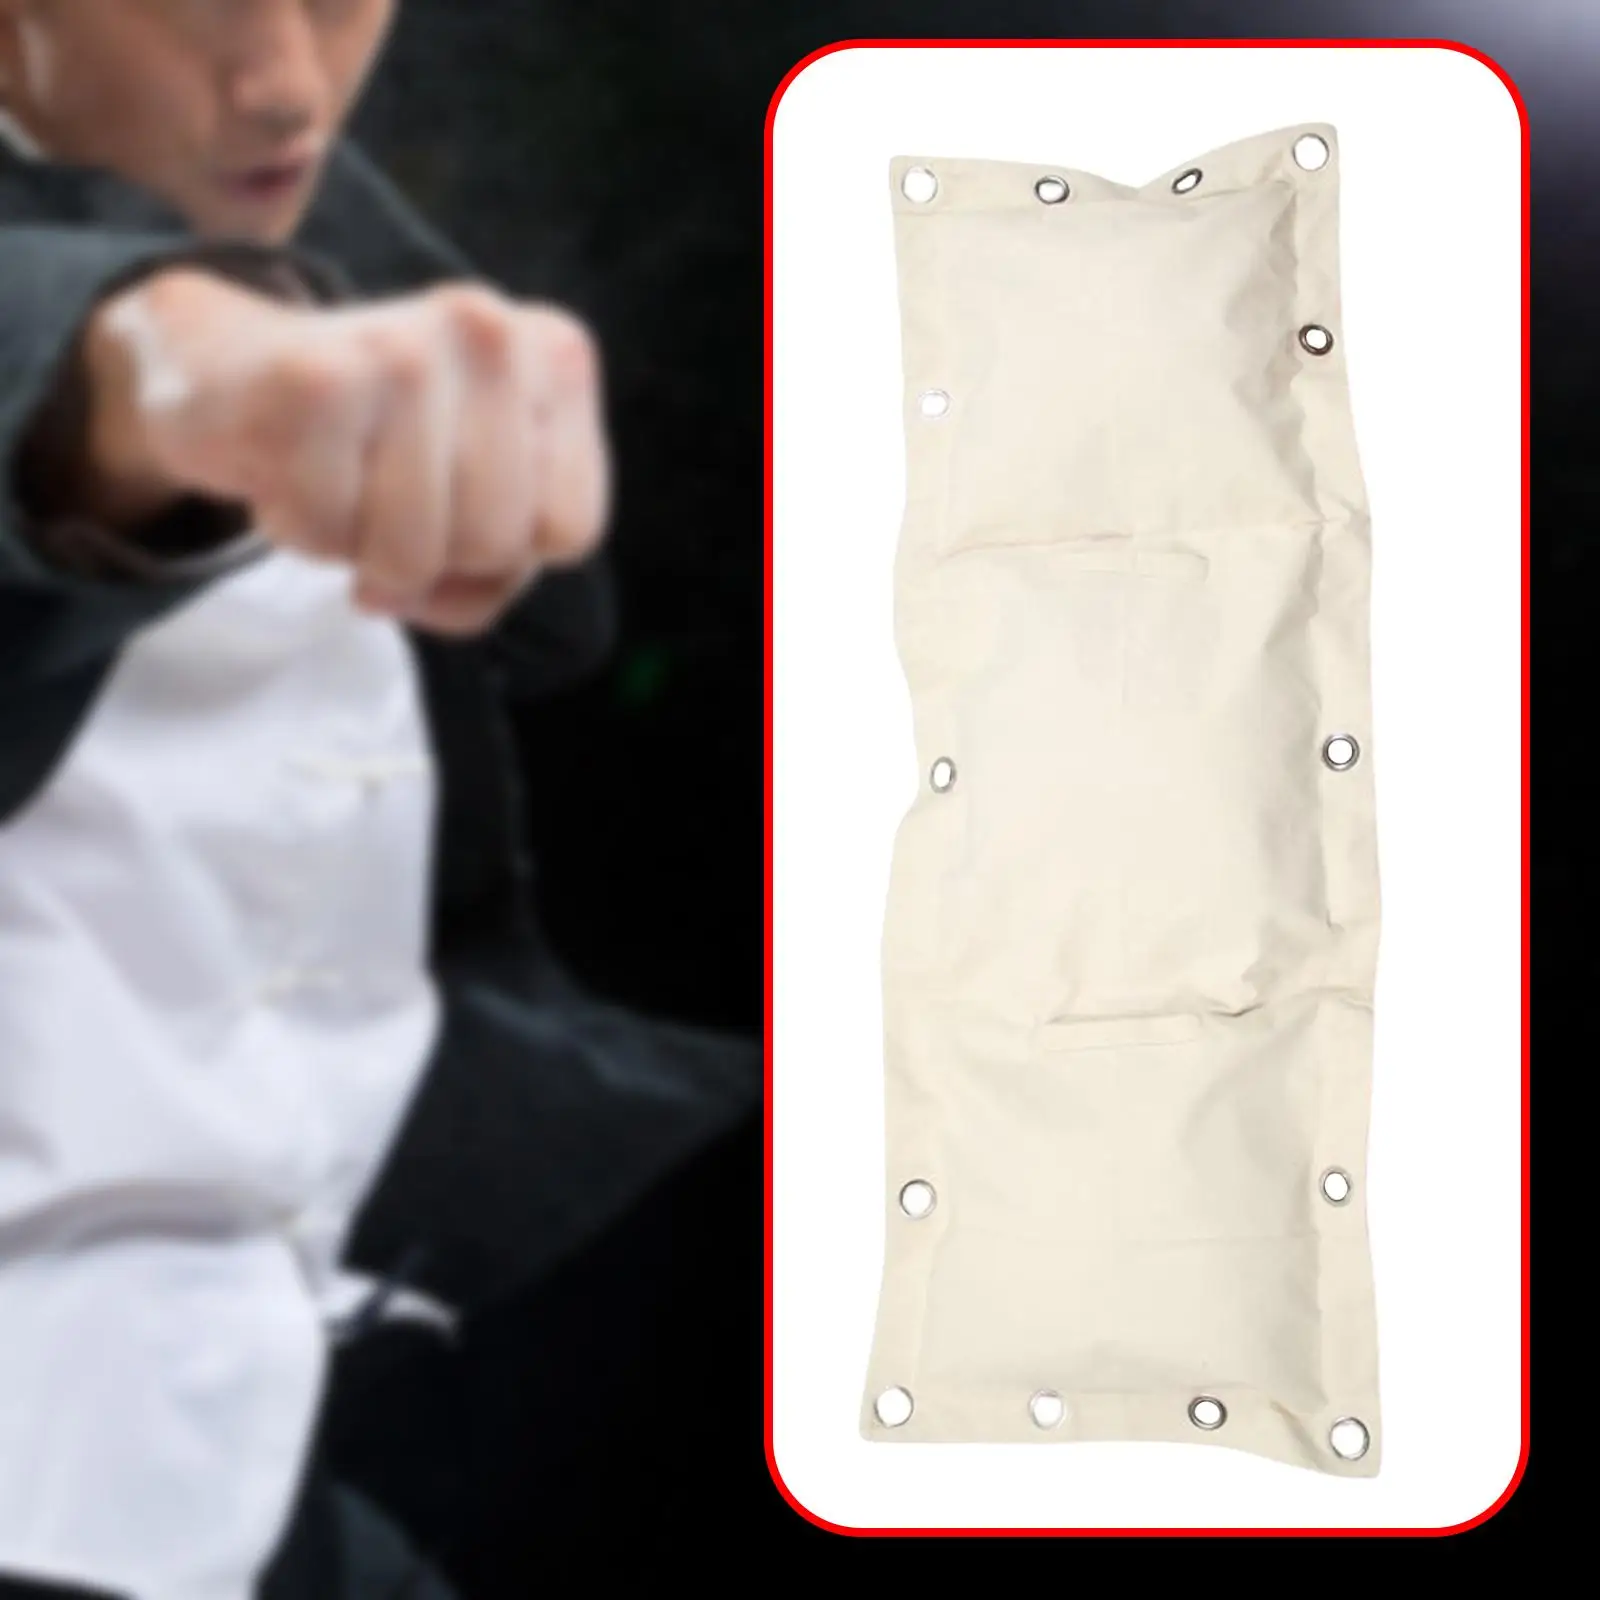 Wall Sandbag Empty Canvas Wall Bags Fore Arm Workouts Wall Mounted Outdoor Indoor Professional Sports Target Training 3 Section